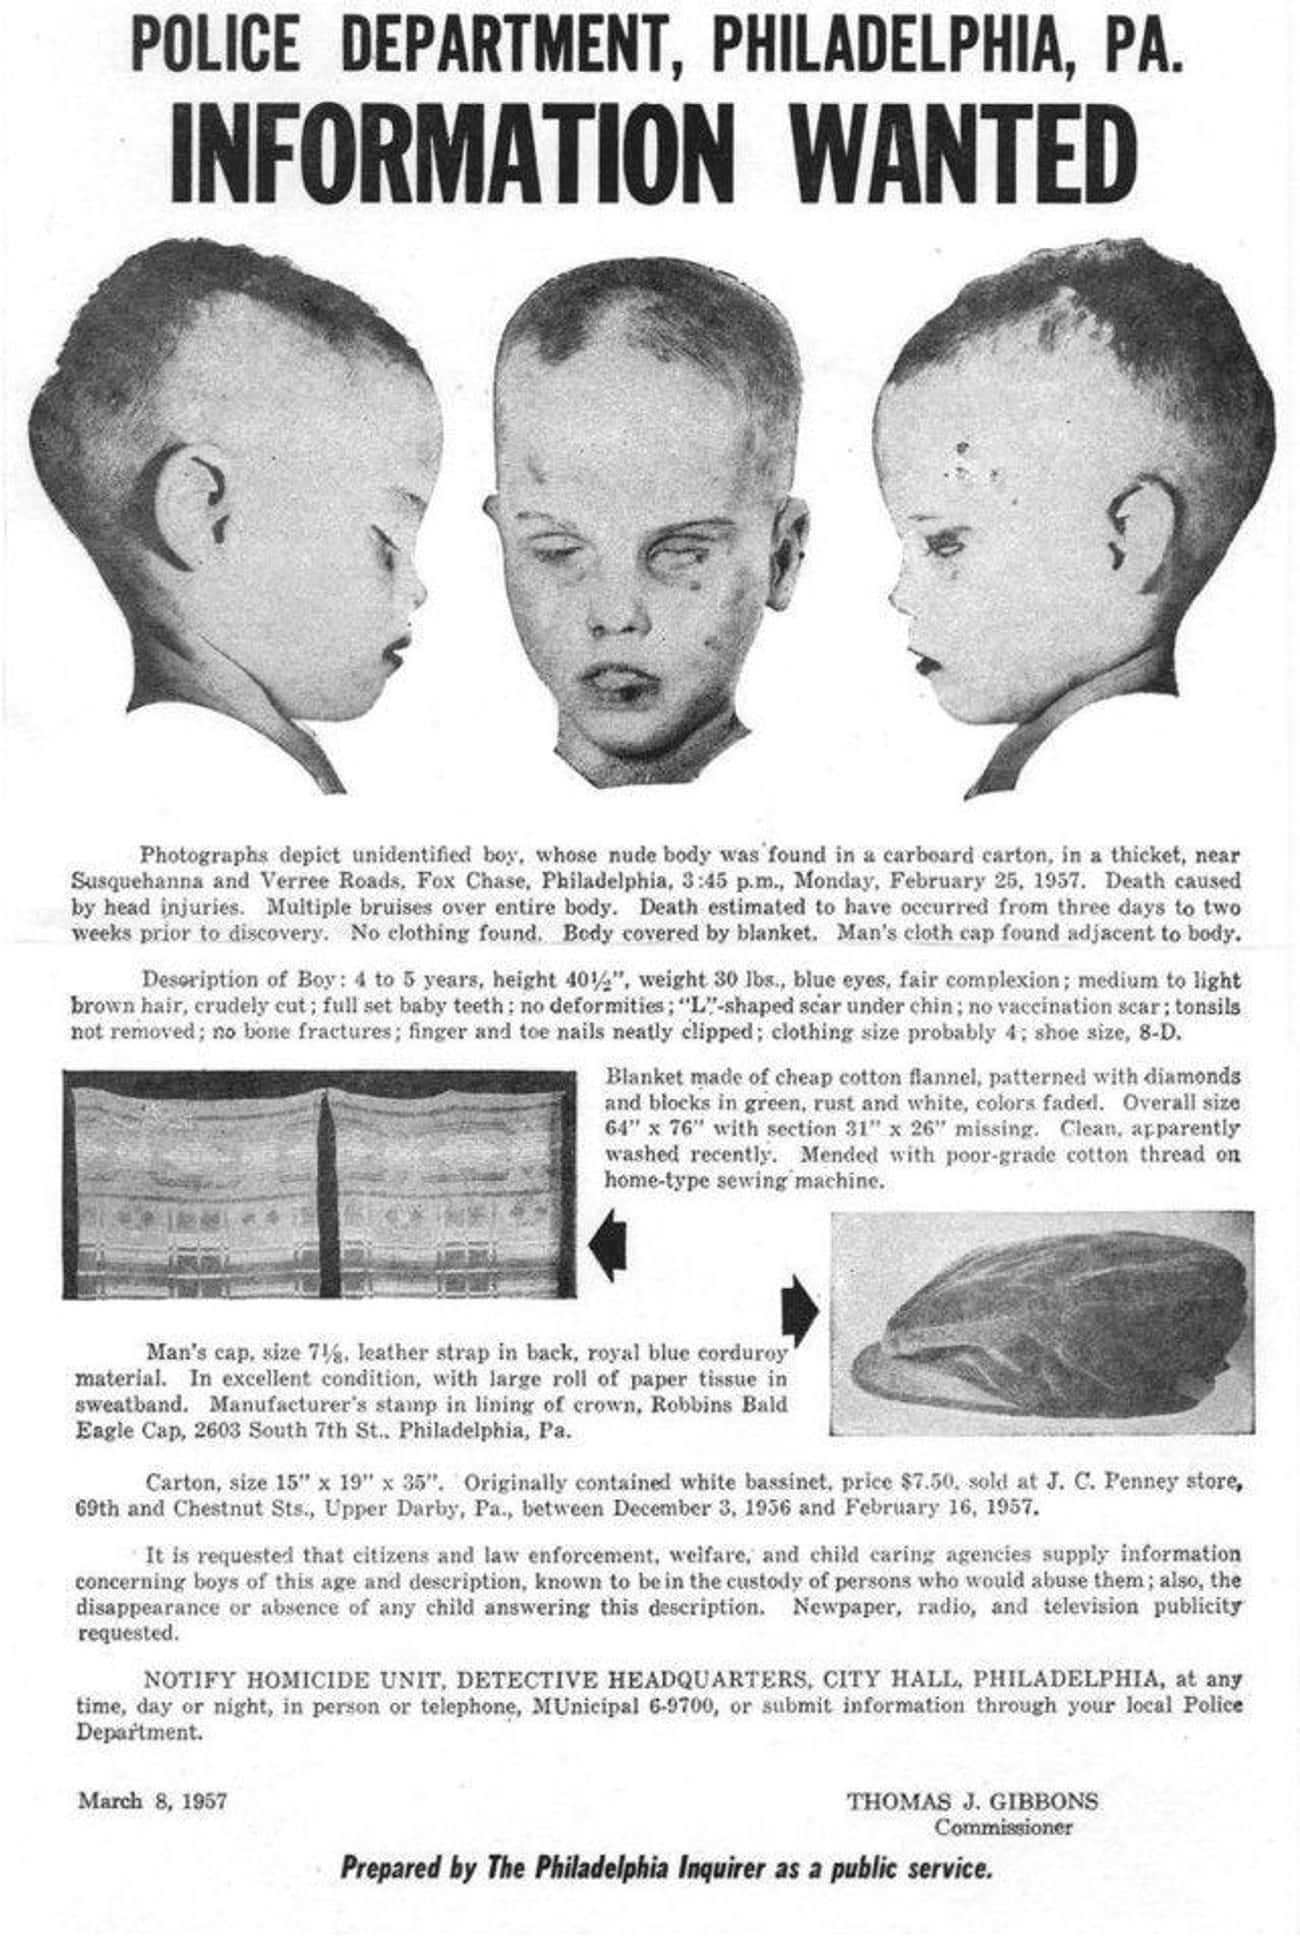 In February 1957, A Young Boy Was Found Beaten To Death And Stuffed In A Box